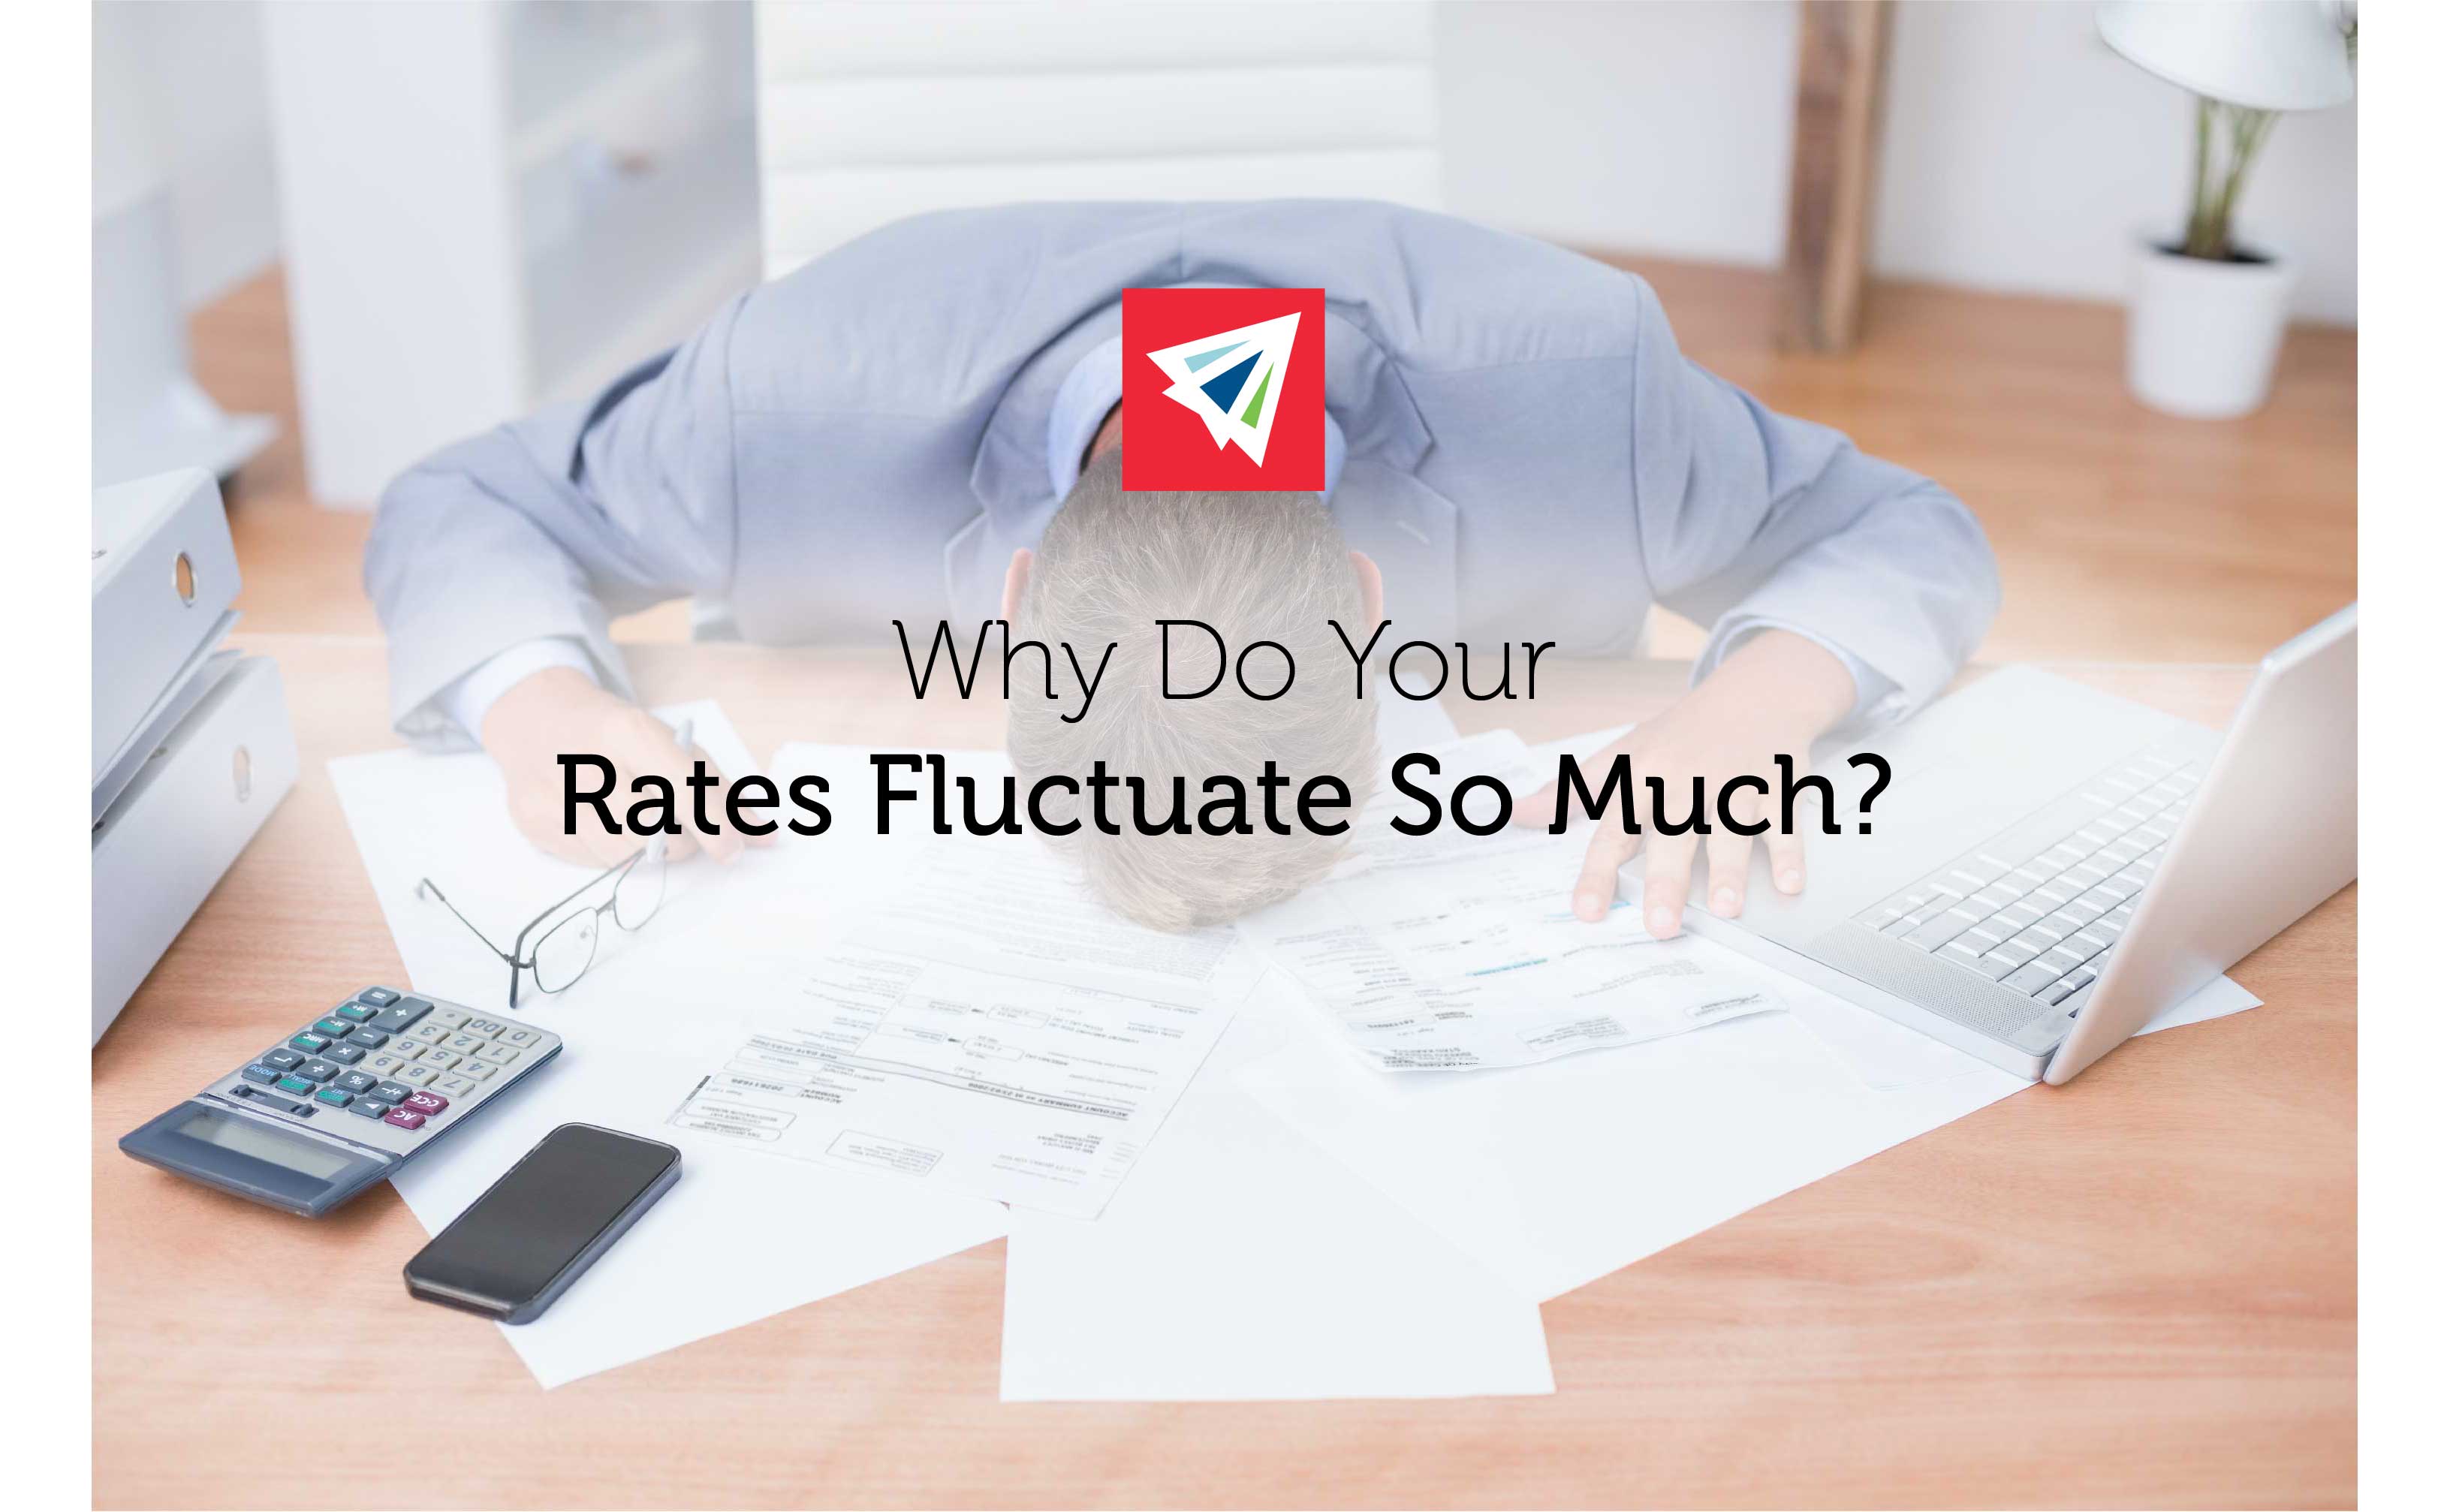 Why Do Your Rates Fluctuate So Much